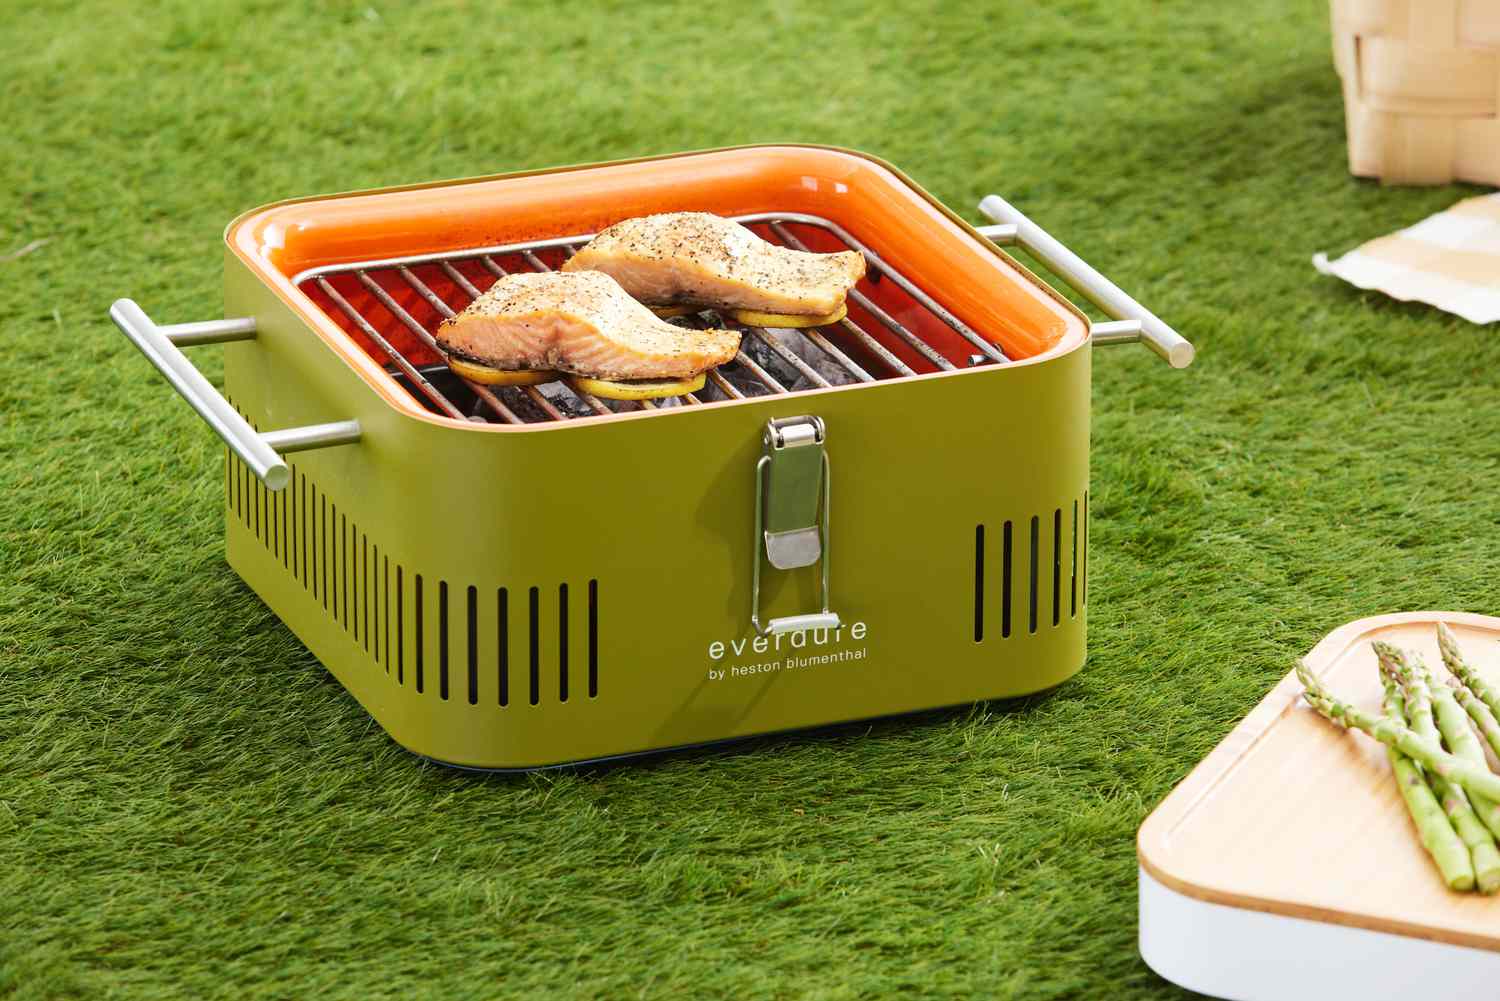 Salmon fillets grilling on lemon slices on Everdure Cube Portable Charcoal Grill displayed on grass 